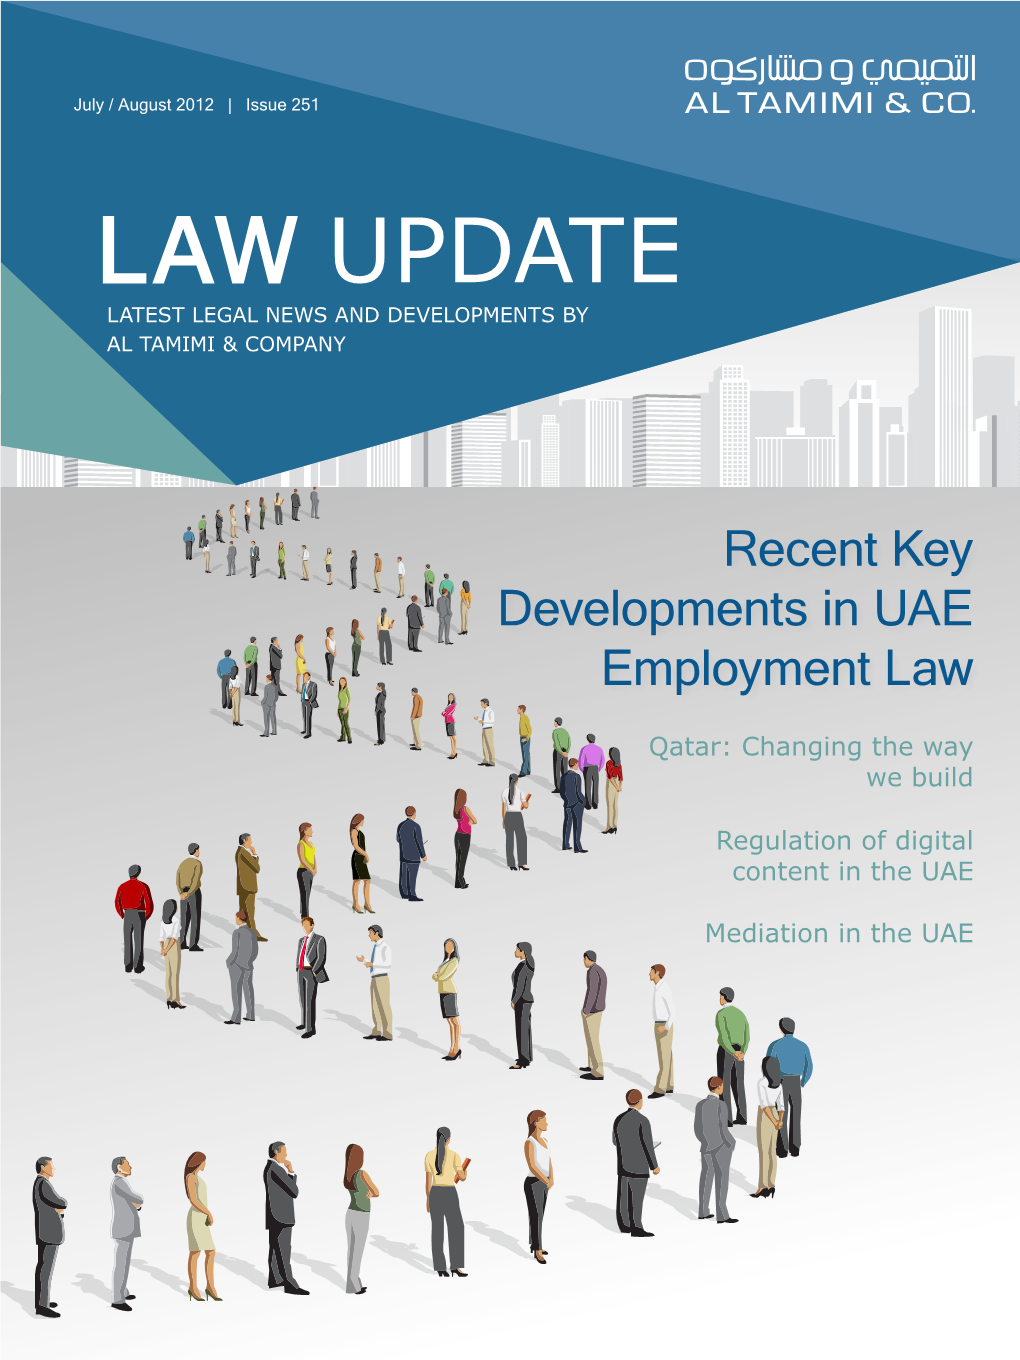 Law Update Latest Legal News and Developments by Al Tamimi & Company